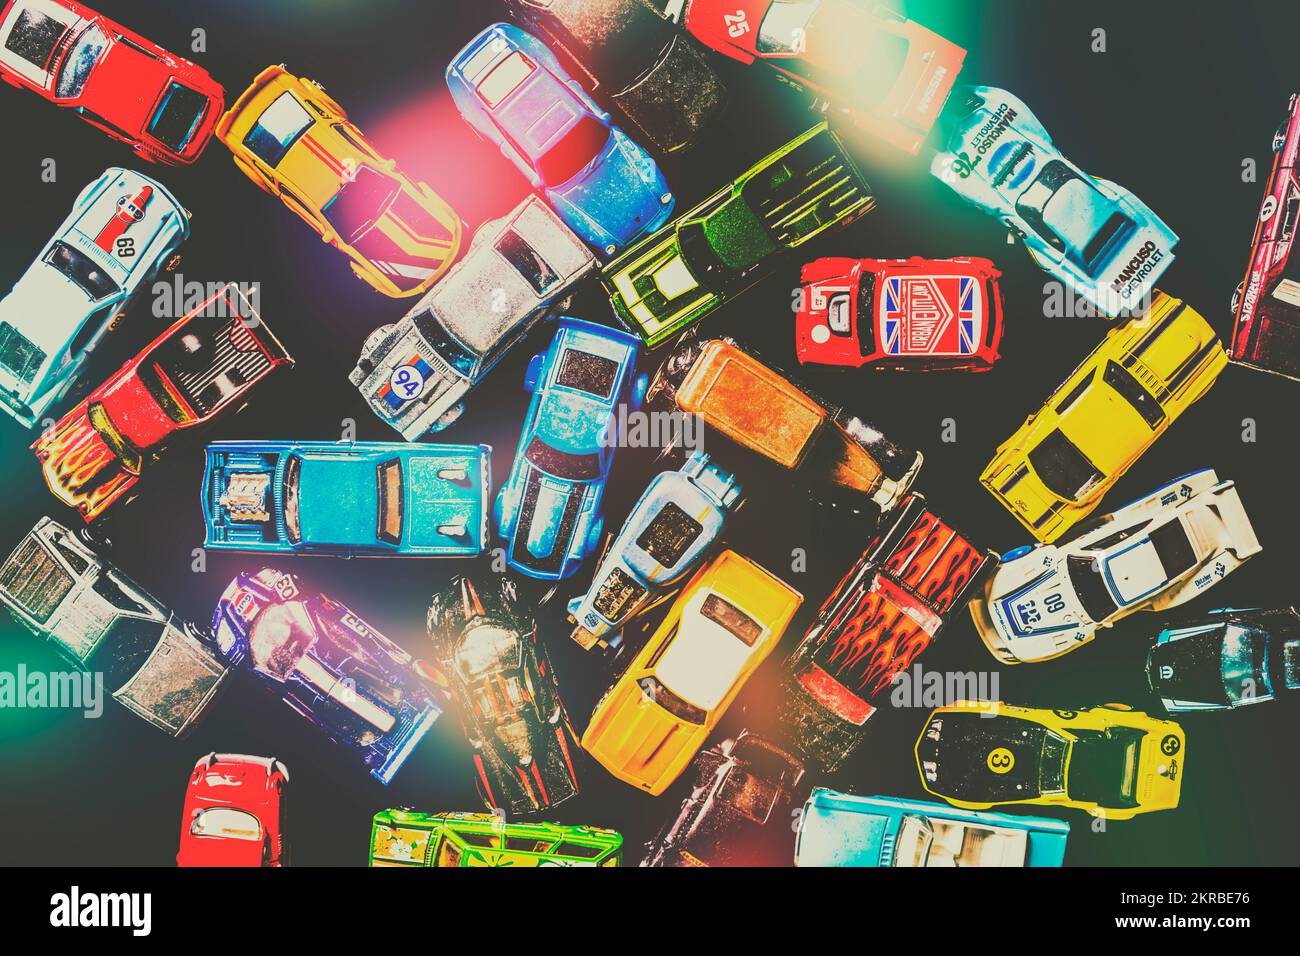 Played out scene in model car calamity with retro toy cars in a destruction derby jam Stock Photo